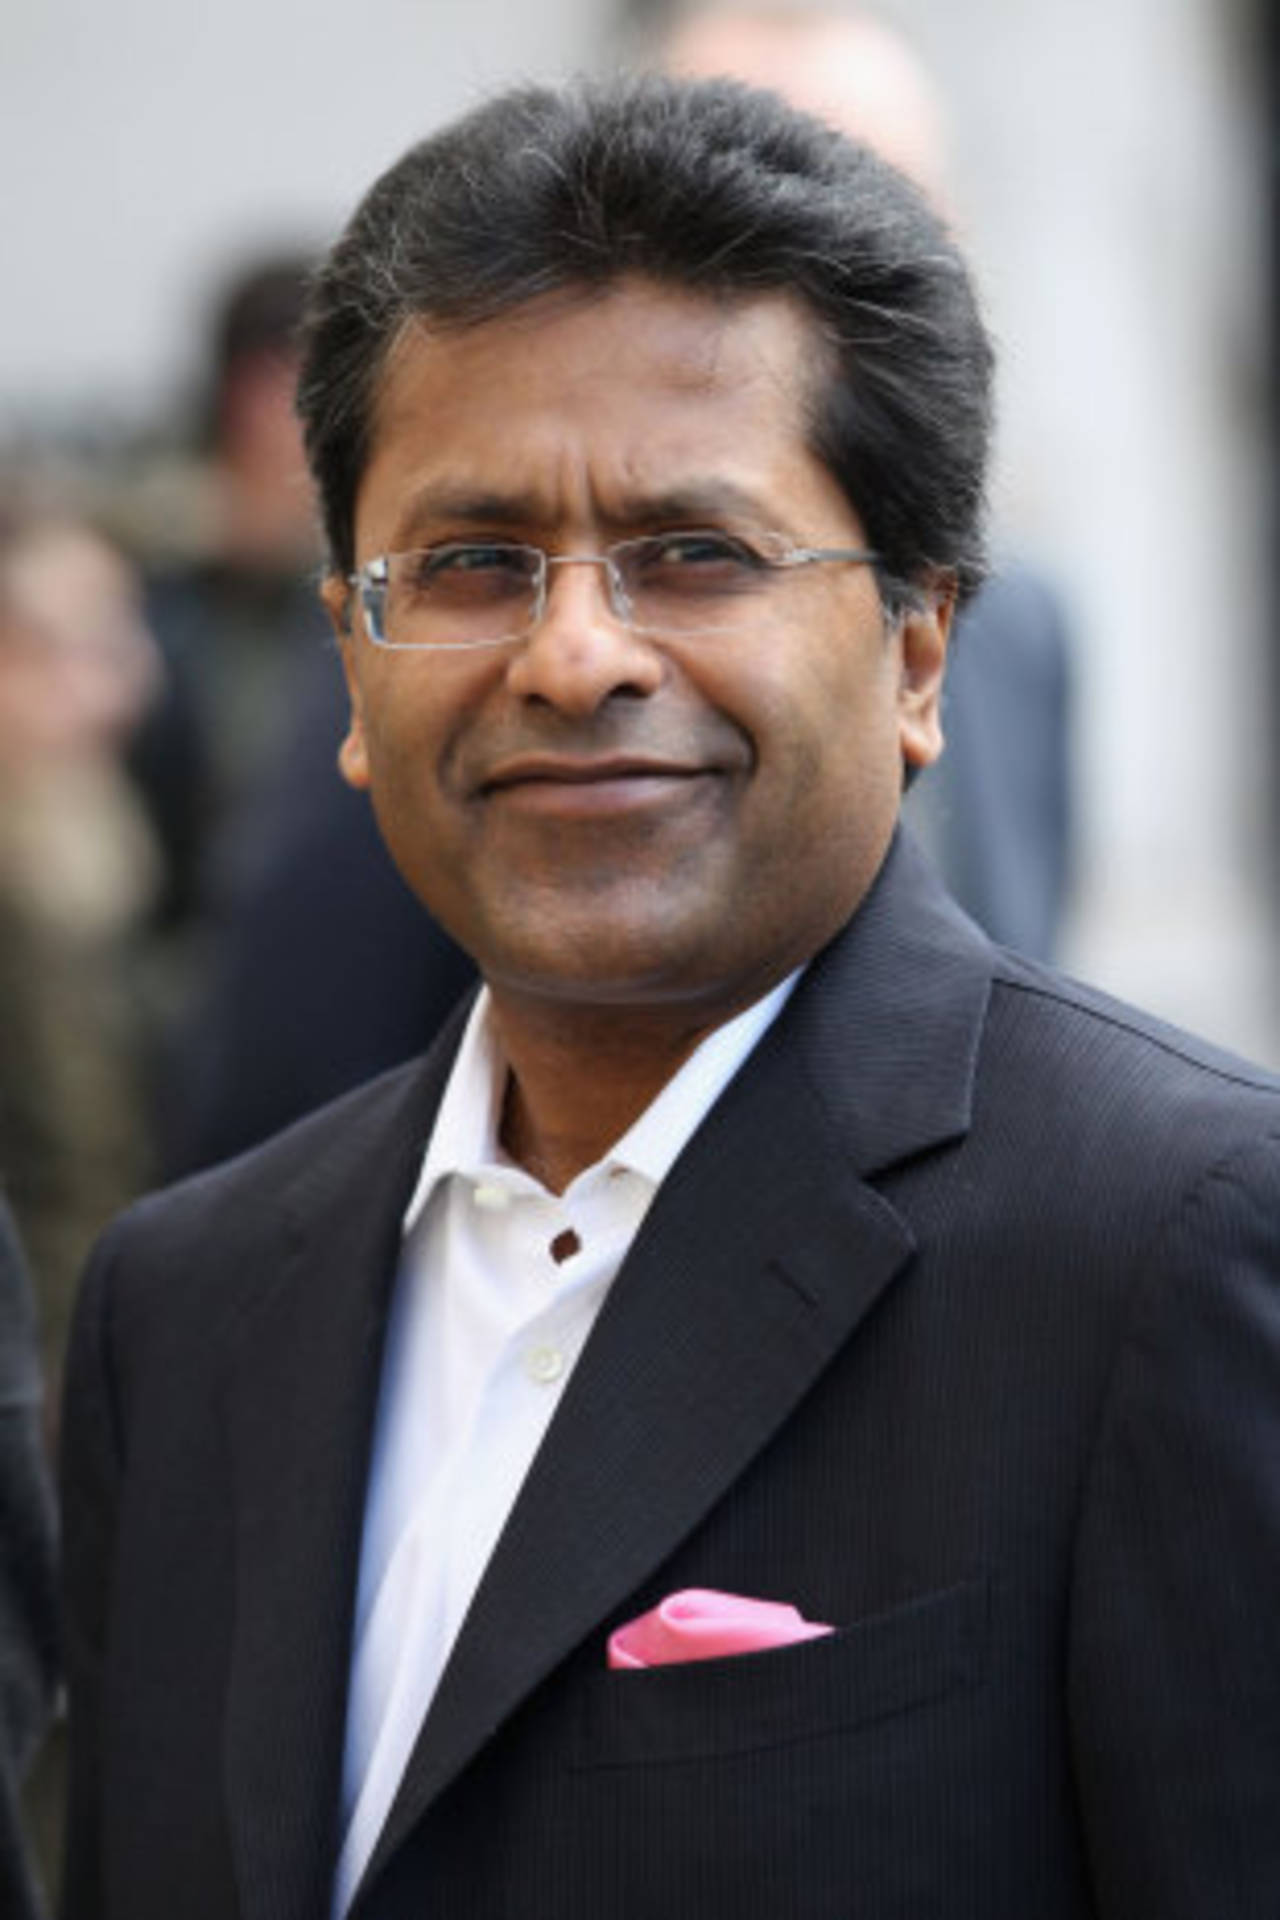 Lalit Modi arrives at the High Court in London for the start of his case against Chris Cairns, London, March, 5, 2012